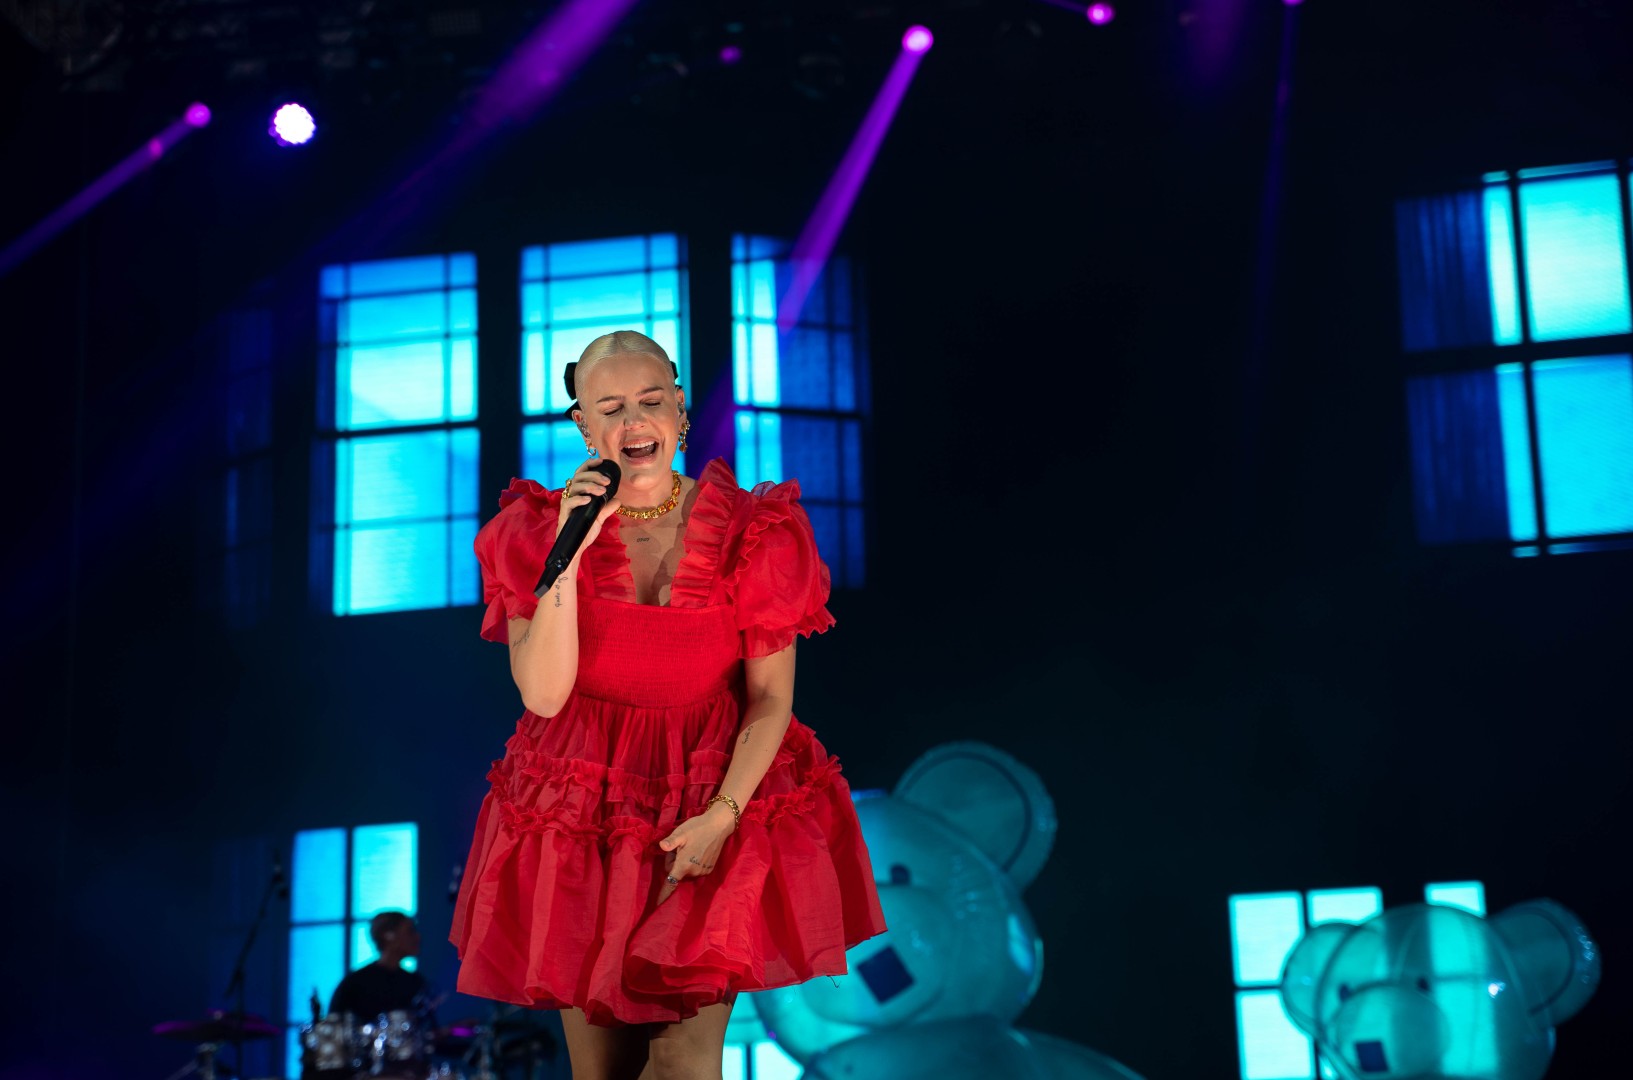 Anne-Marie at Cluj Arena in Cluj-Napoca on August 7, 2022 (e6edc1f628)